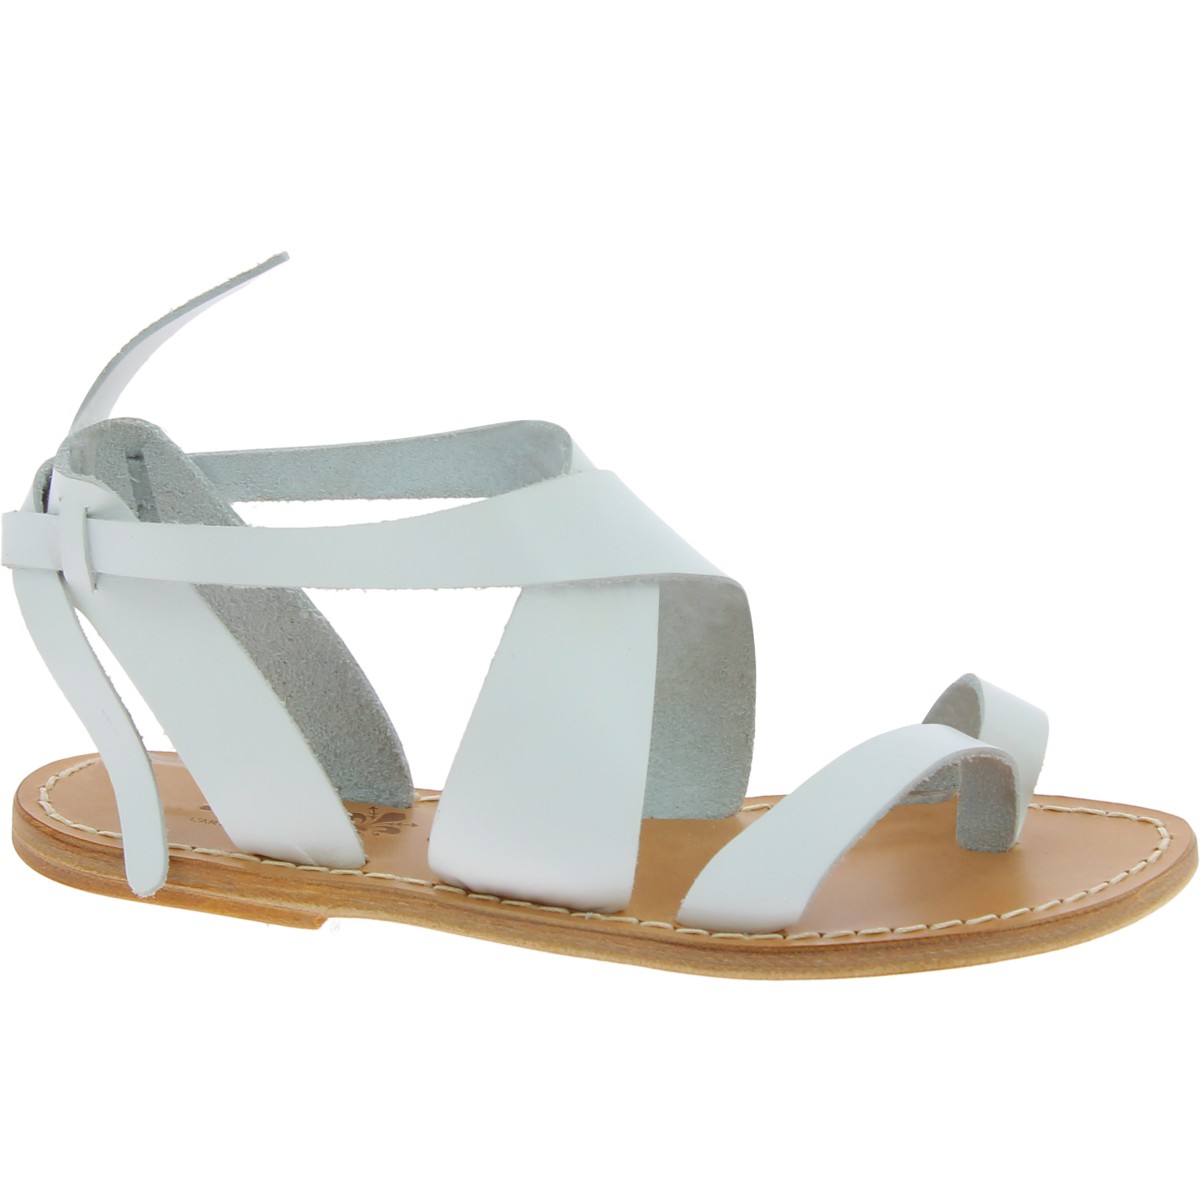 Women's sandals in white leather handmade in Italy | The leather craftsmen